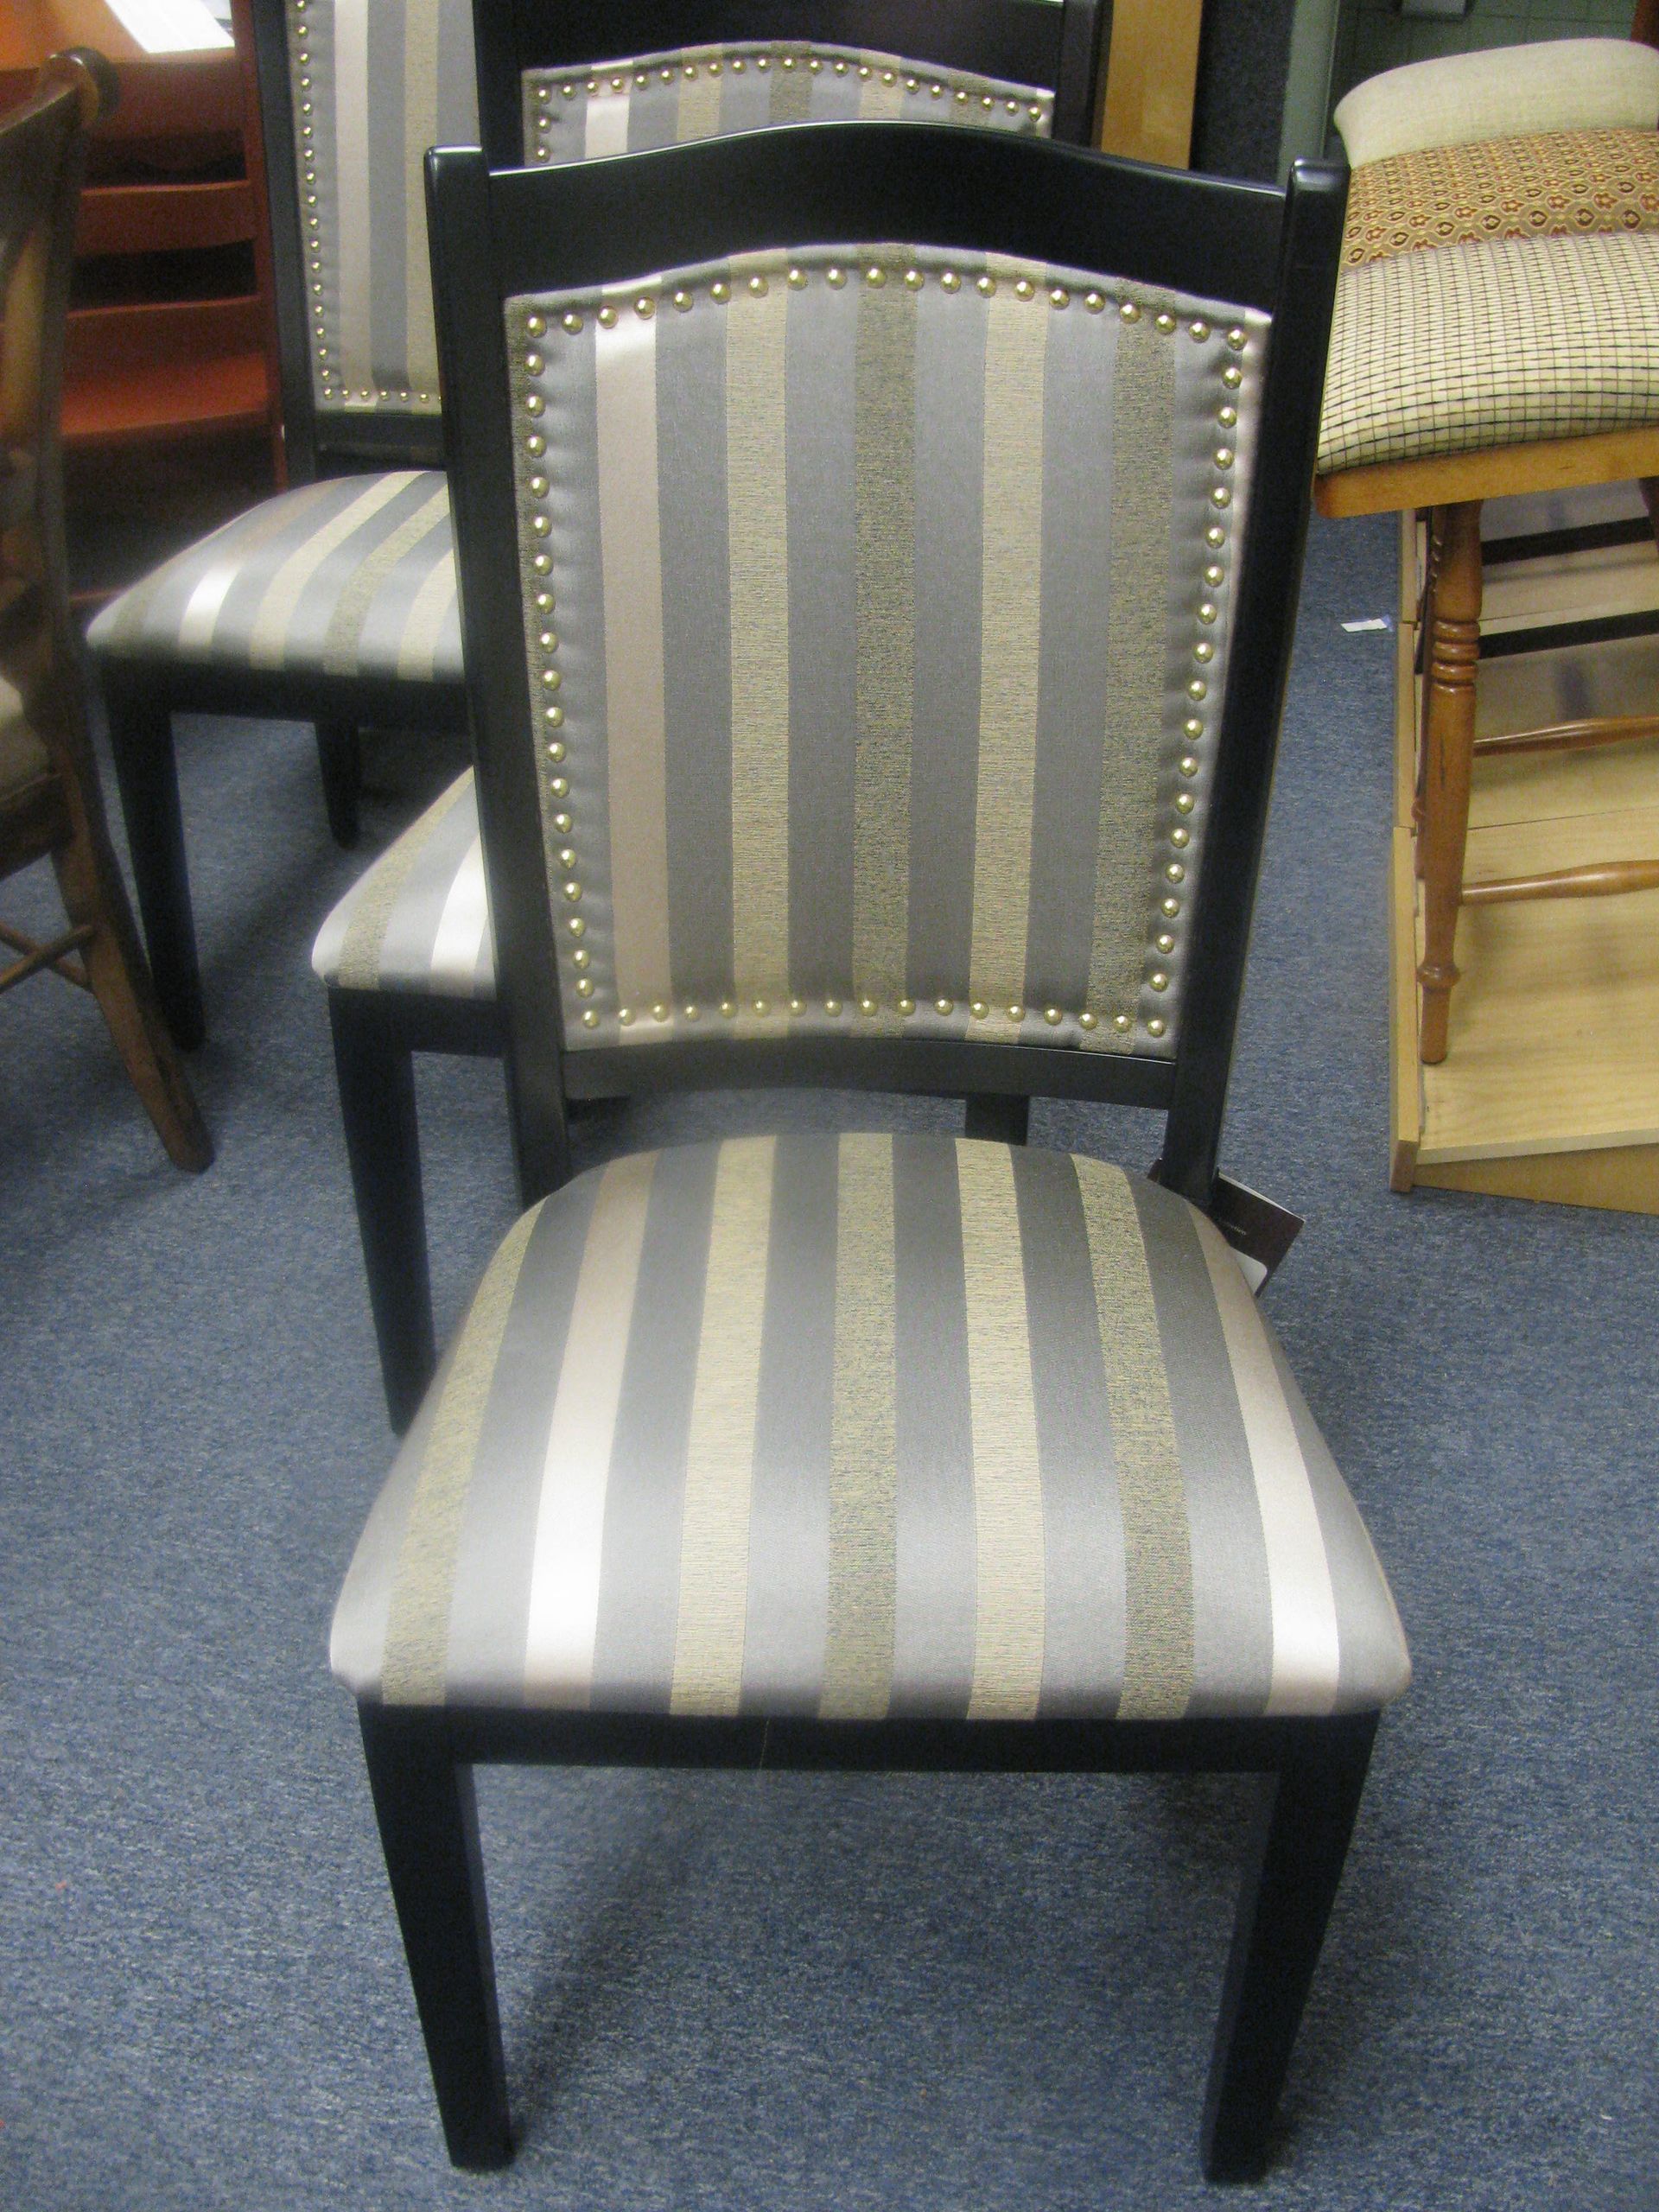 Six chairs only - upholstered seat and back in grey stripe fabric - black frame - nailheads